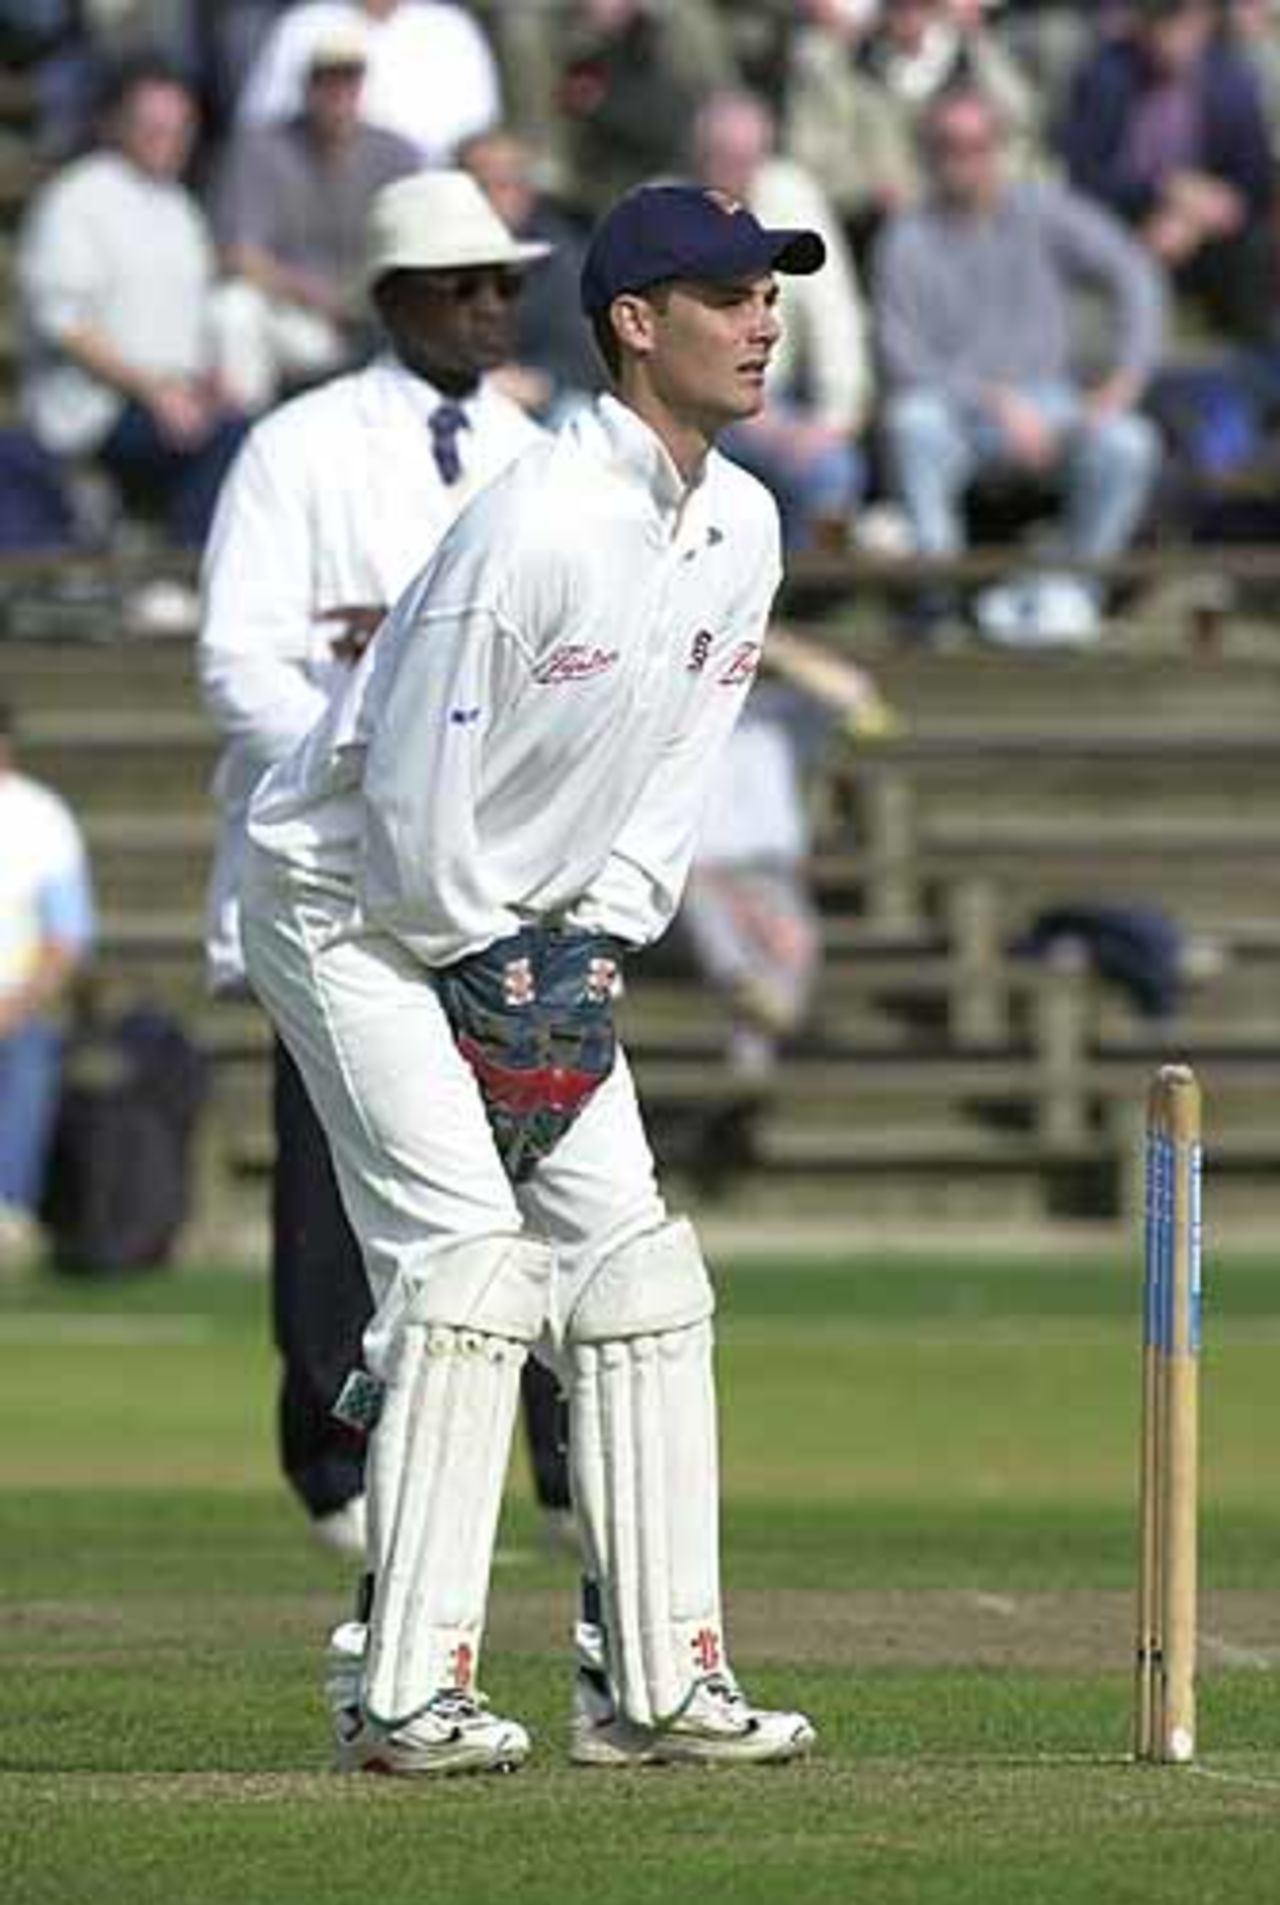 England prospect Jamie Foster at the stumps, Scarborough 14th Sep 2001